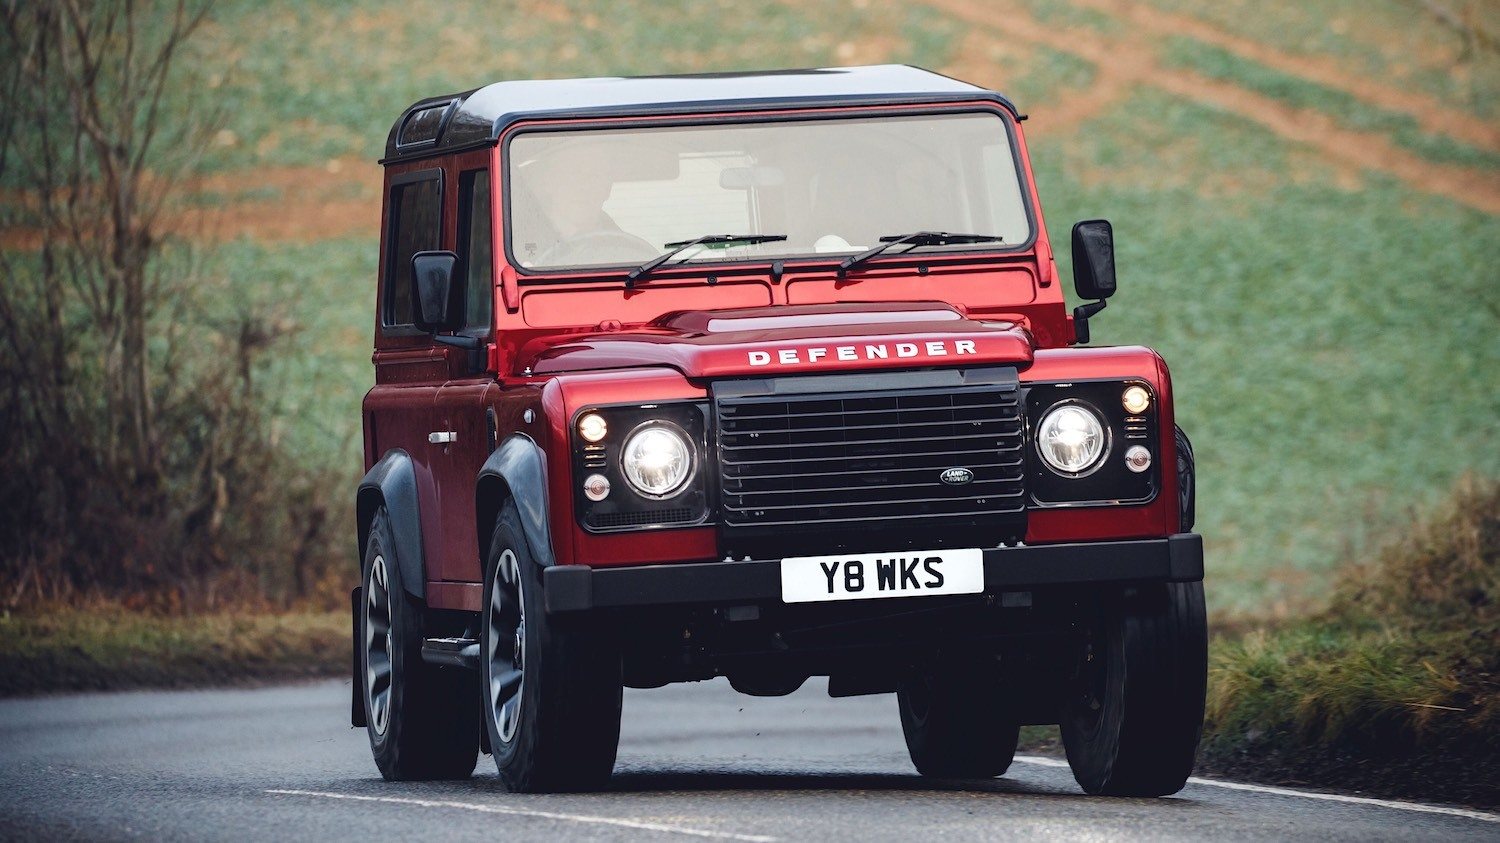 The latest 70th Edition Defender for the JPR 2018 70th Anniversary Celebrations 12